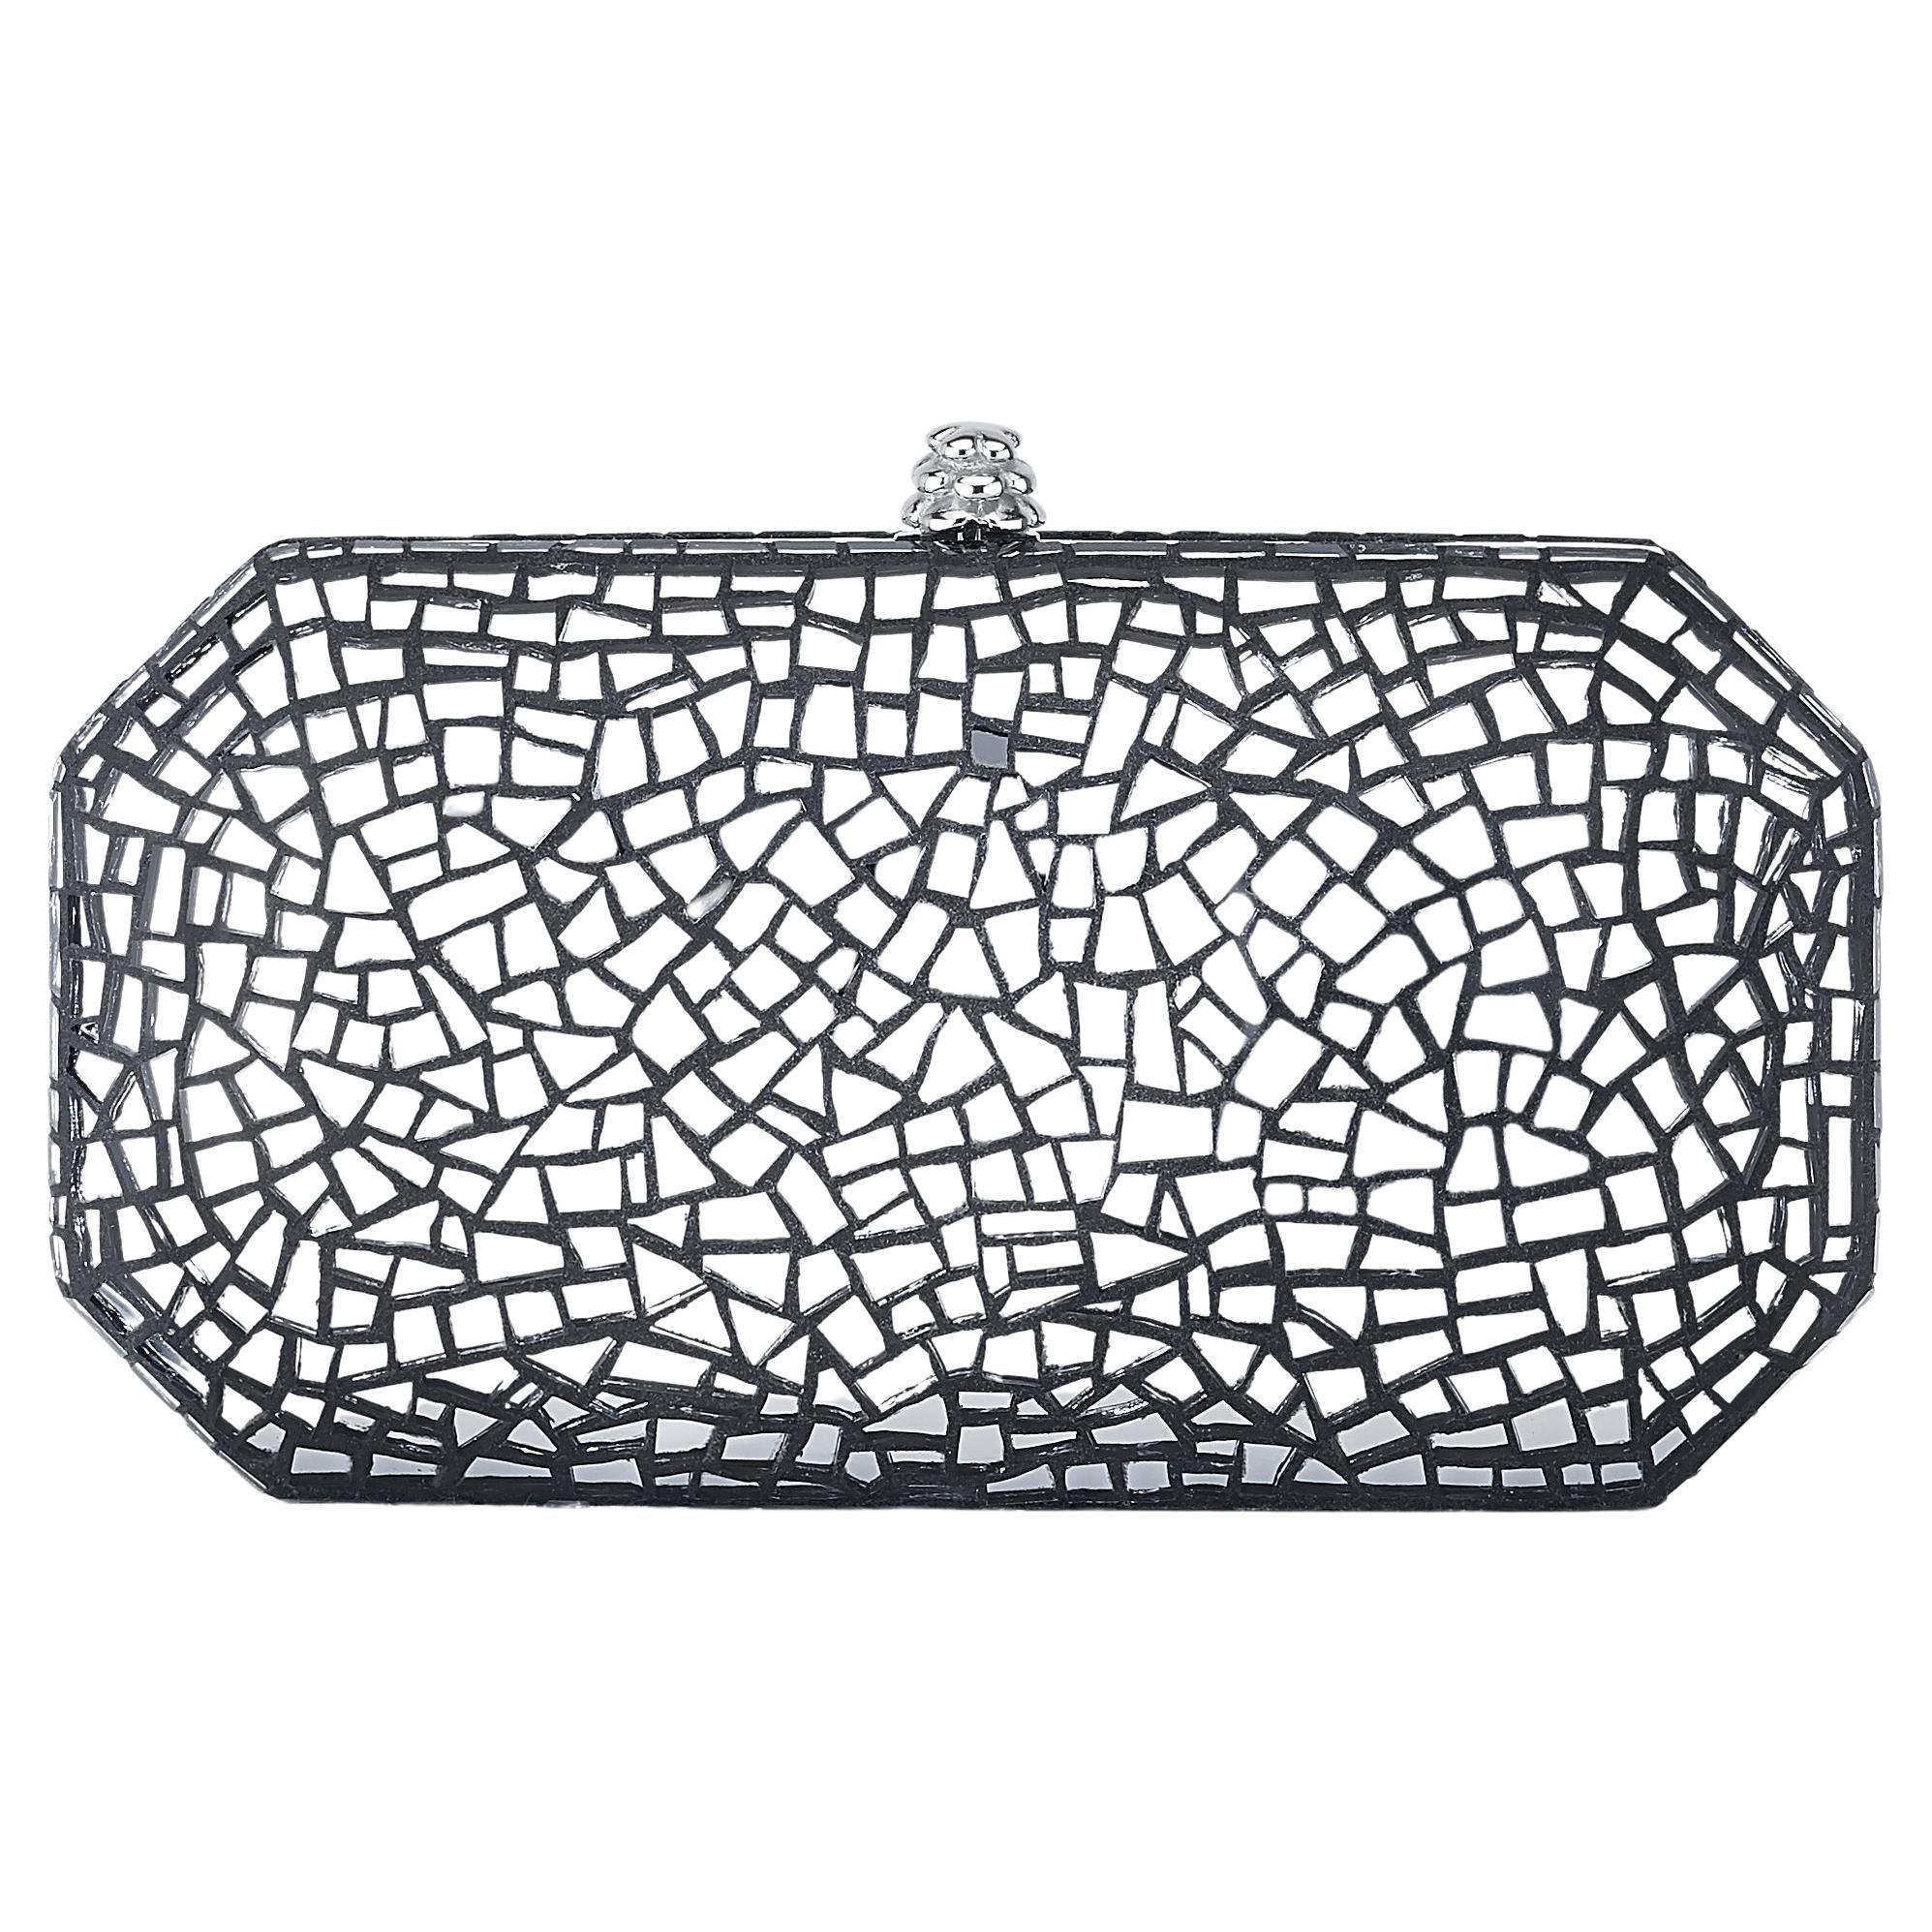 TYLER ELLIS Perry Clutch Small in Black Mosaic Mirrored Tile and Silver Hardware